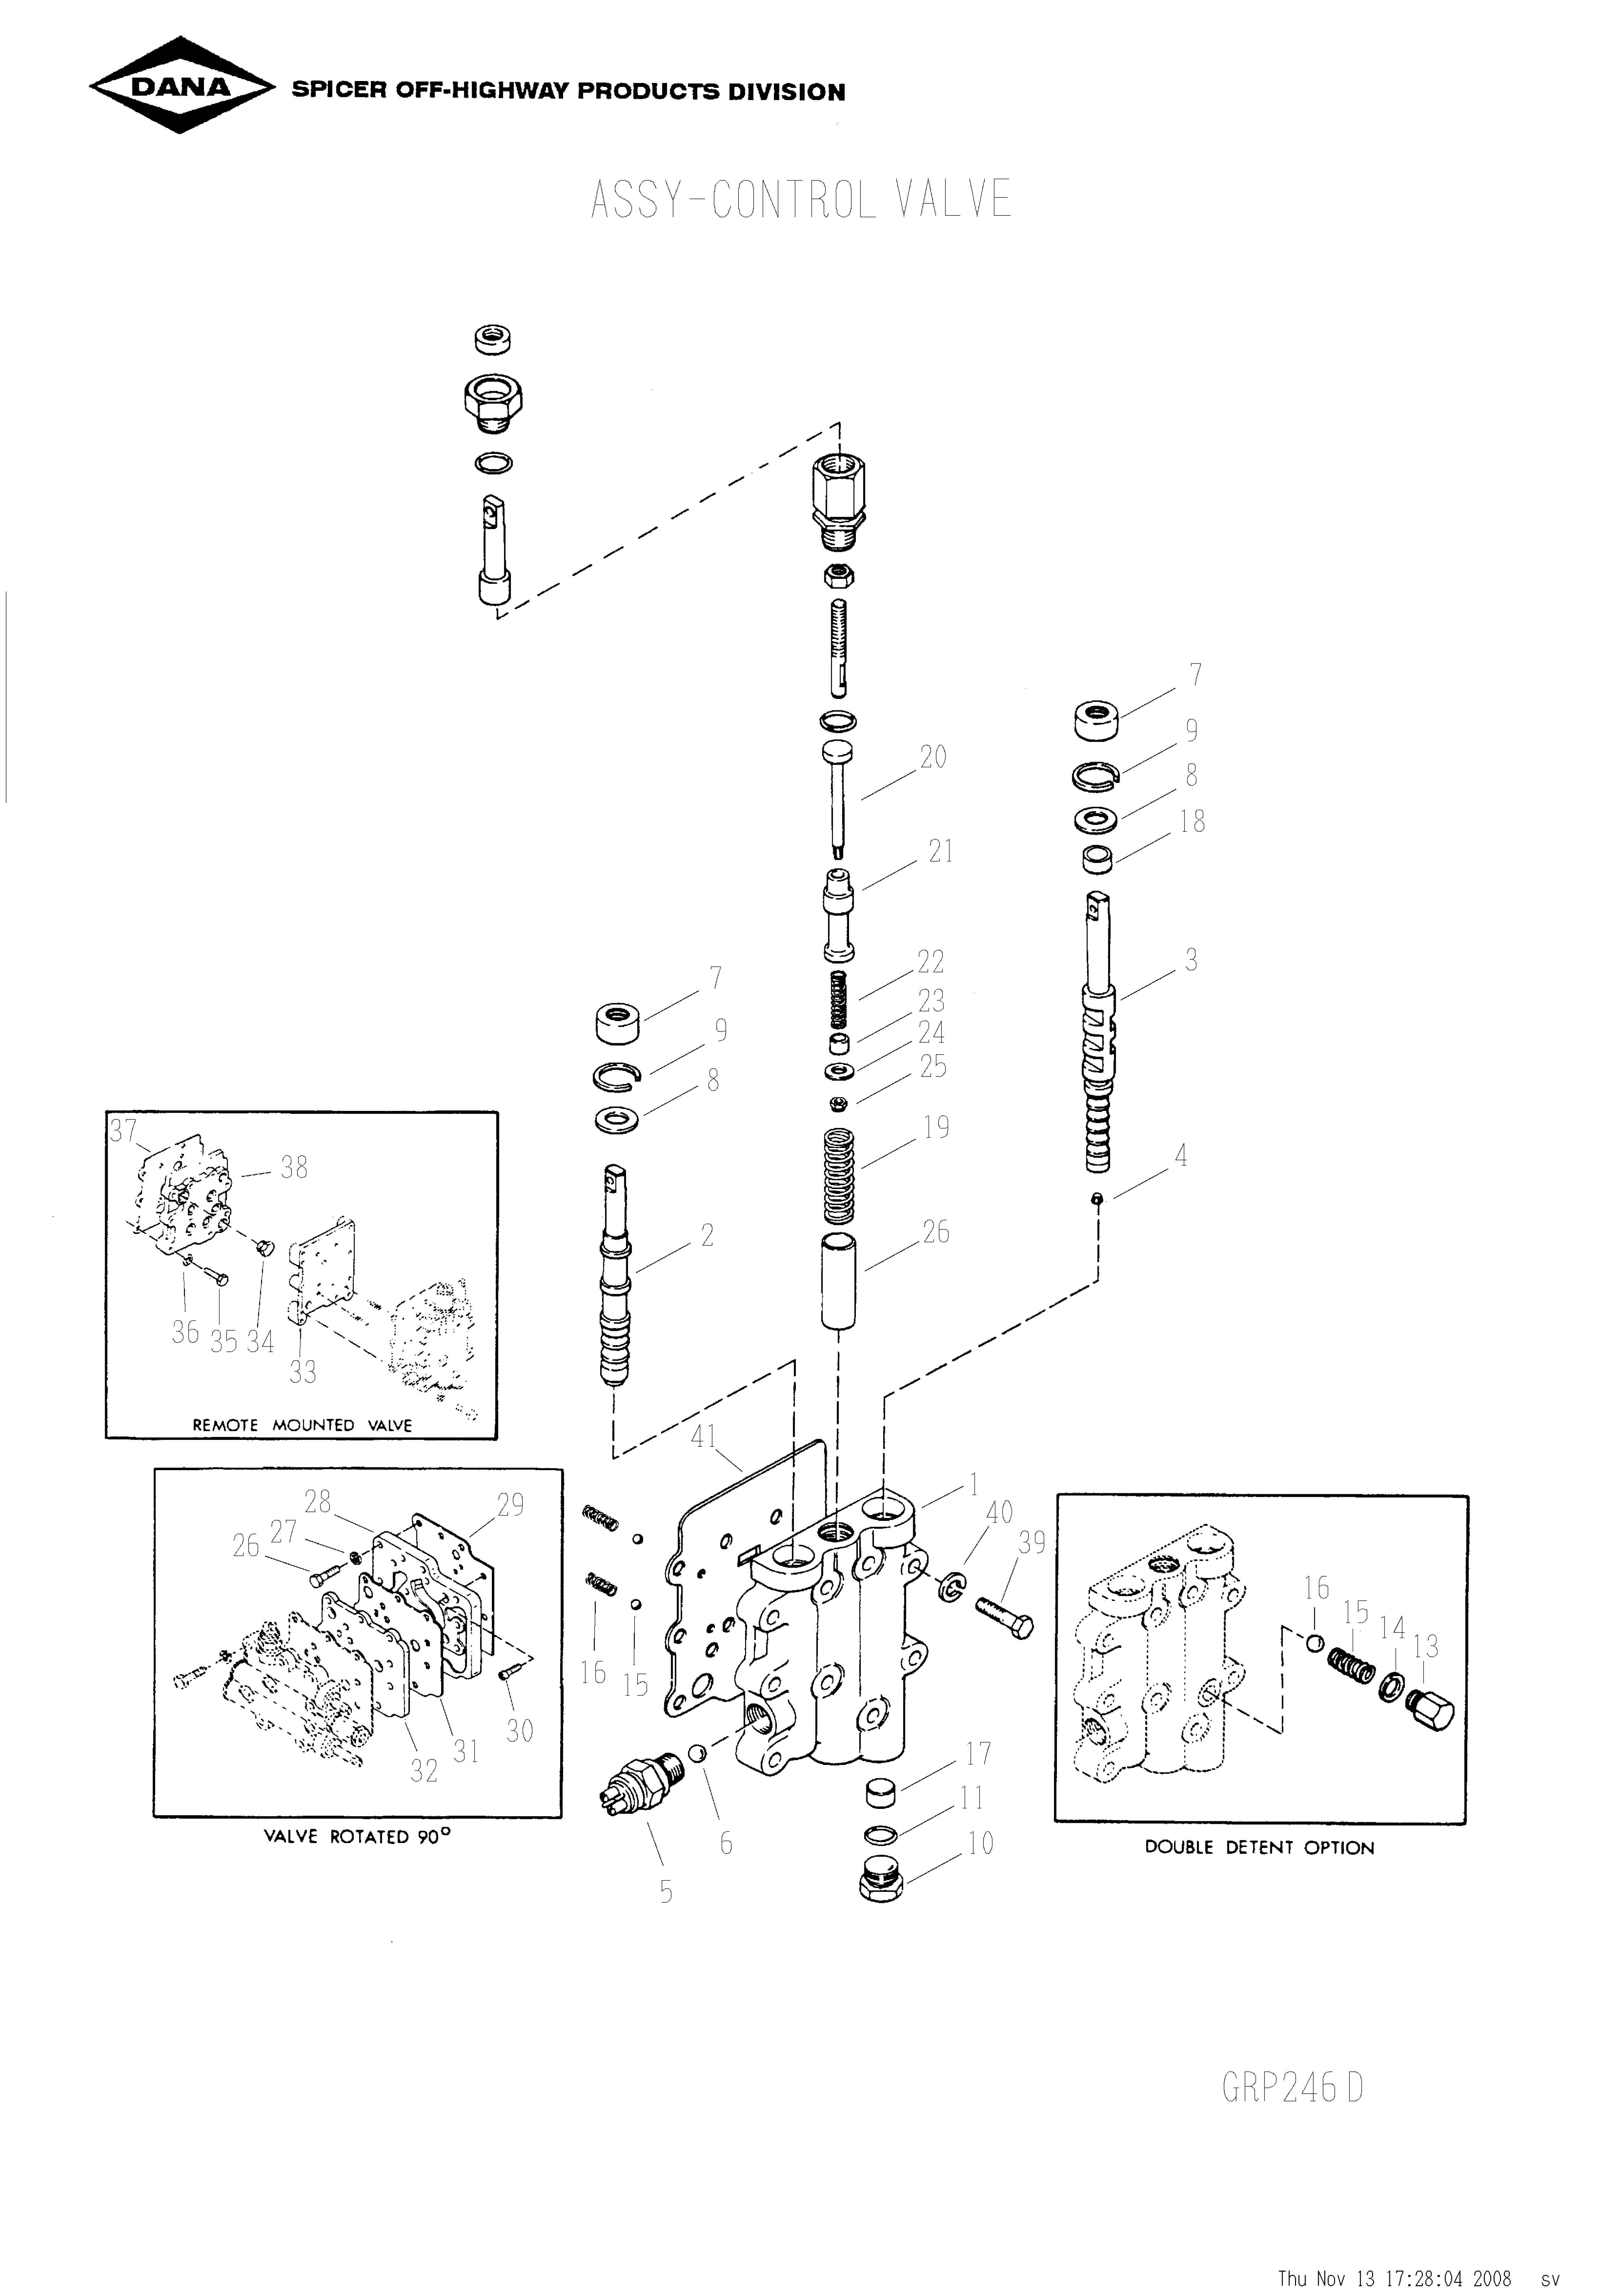 drawing for CNH NEW HOLLAND 11403 - SPRING (figure 1)